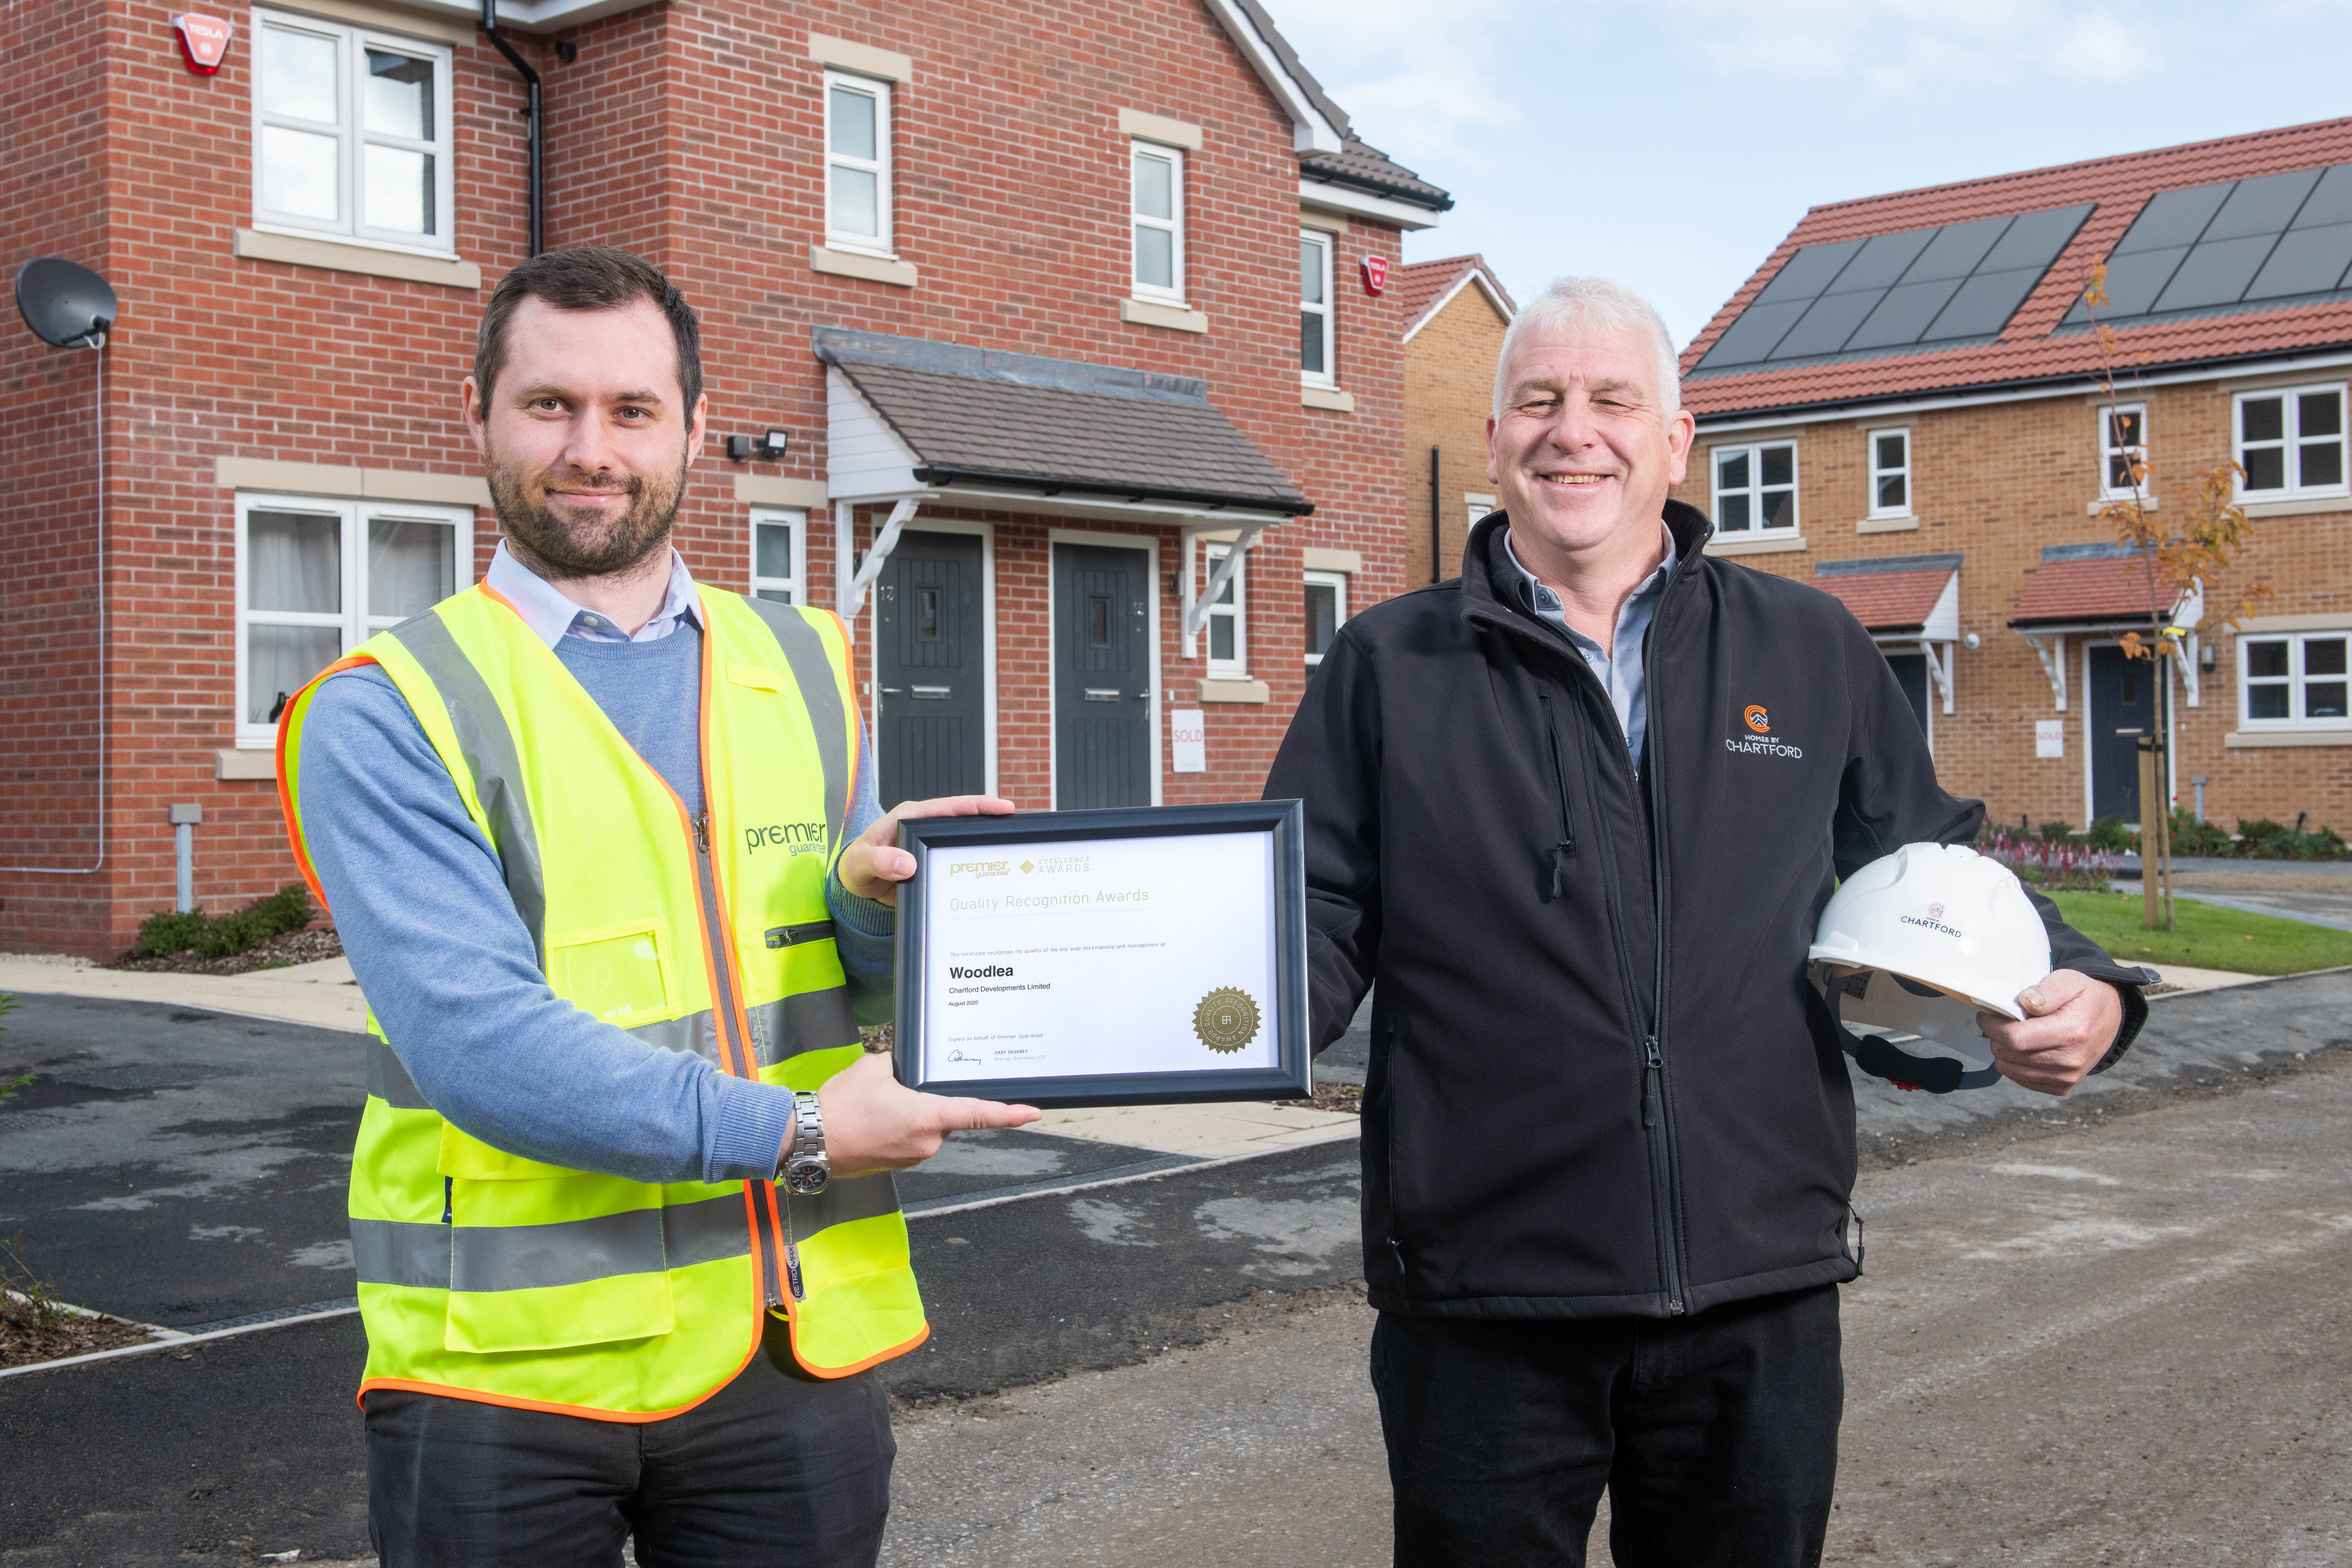 All smiles at our award winning Woodlea Development